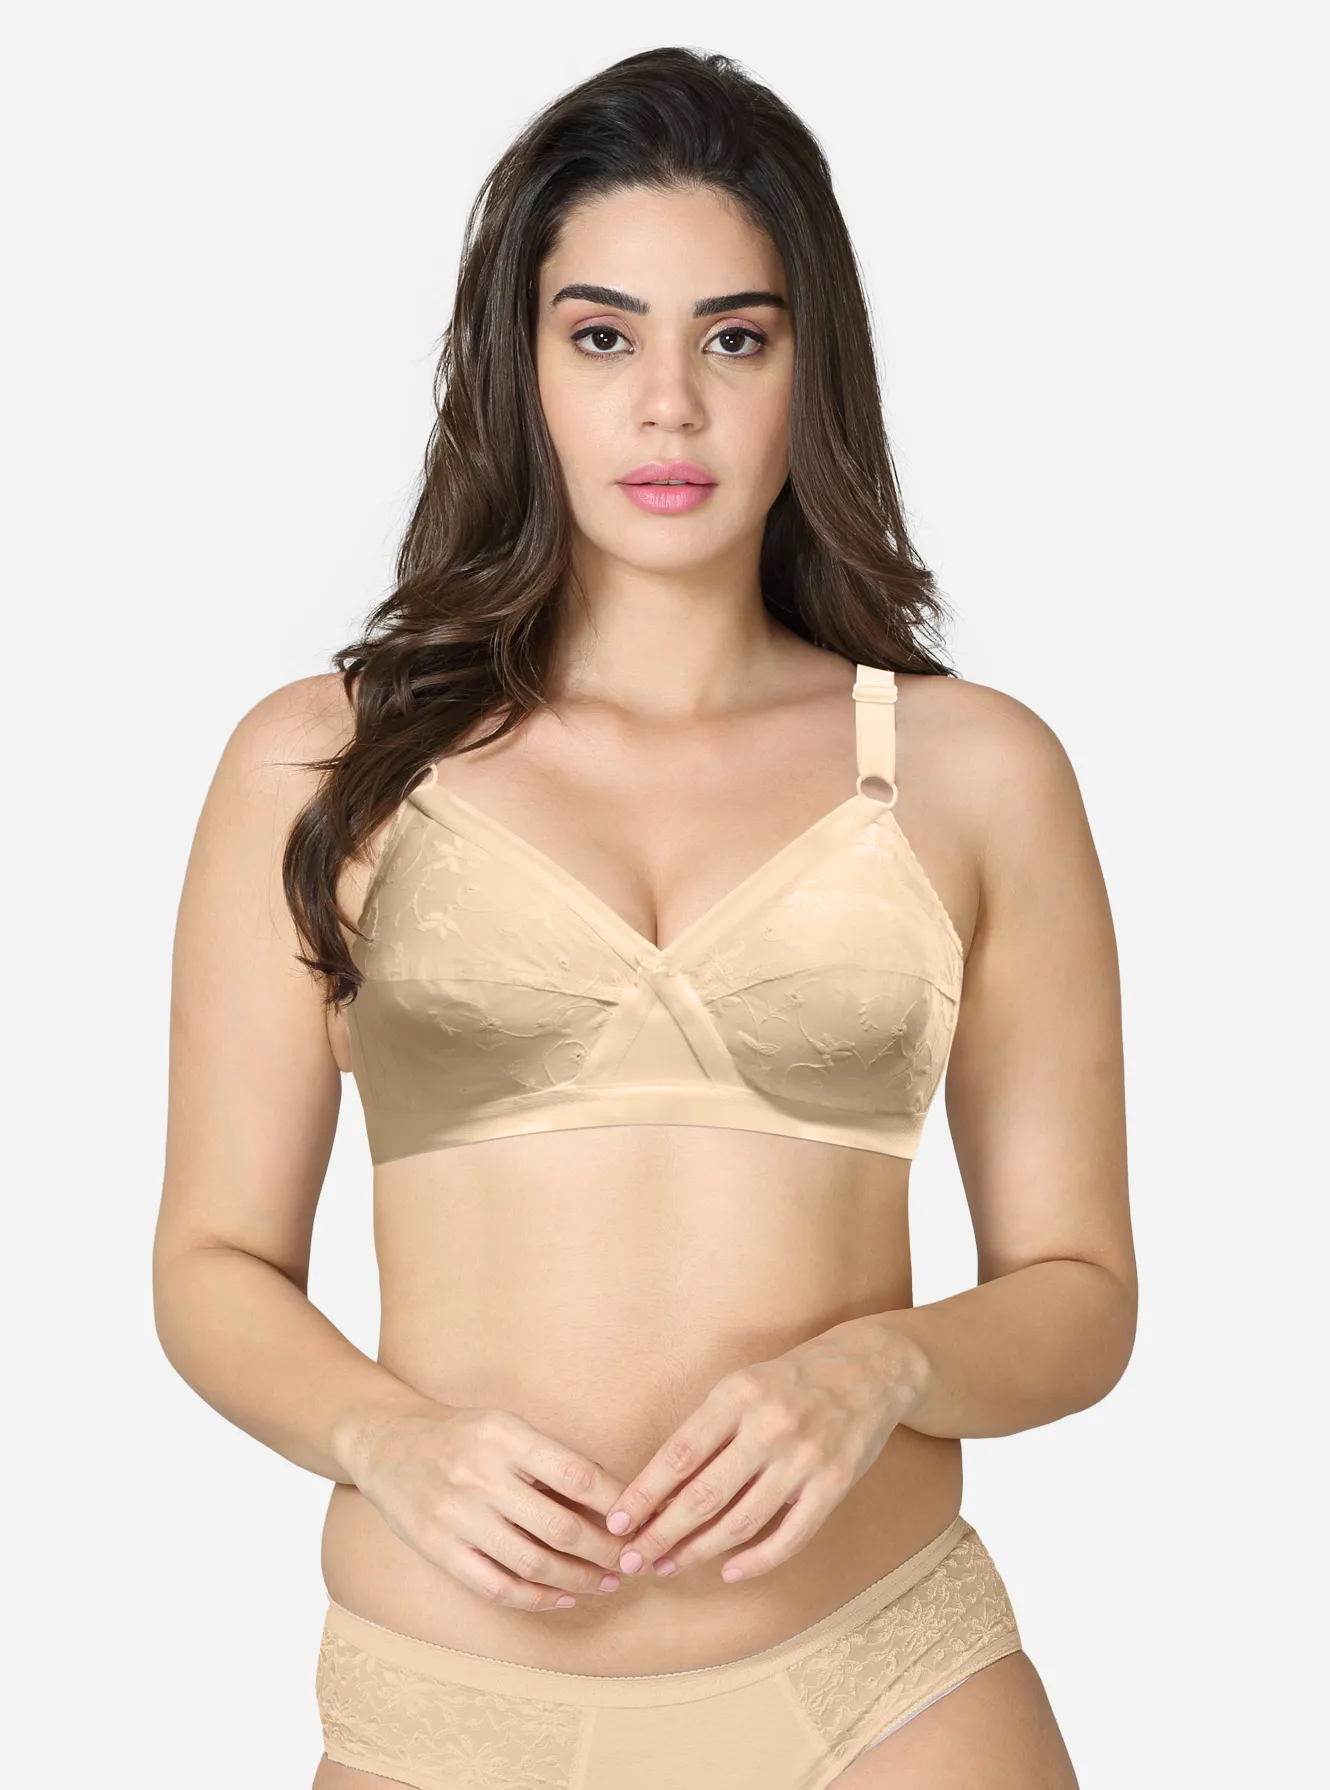 Special Big Size Non Padded Full Coverage Bra (Pack Of 3) Big Size Bra Plus  Size